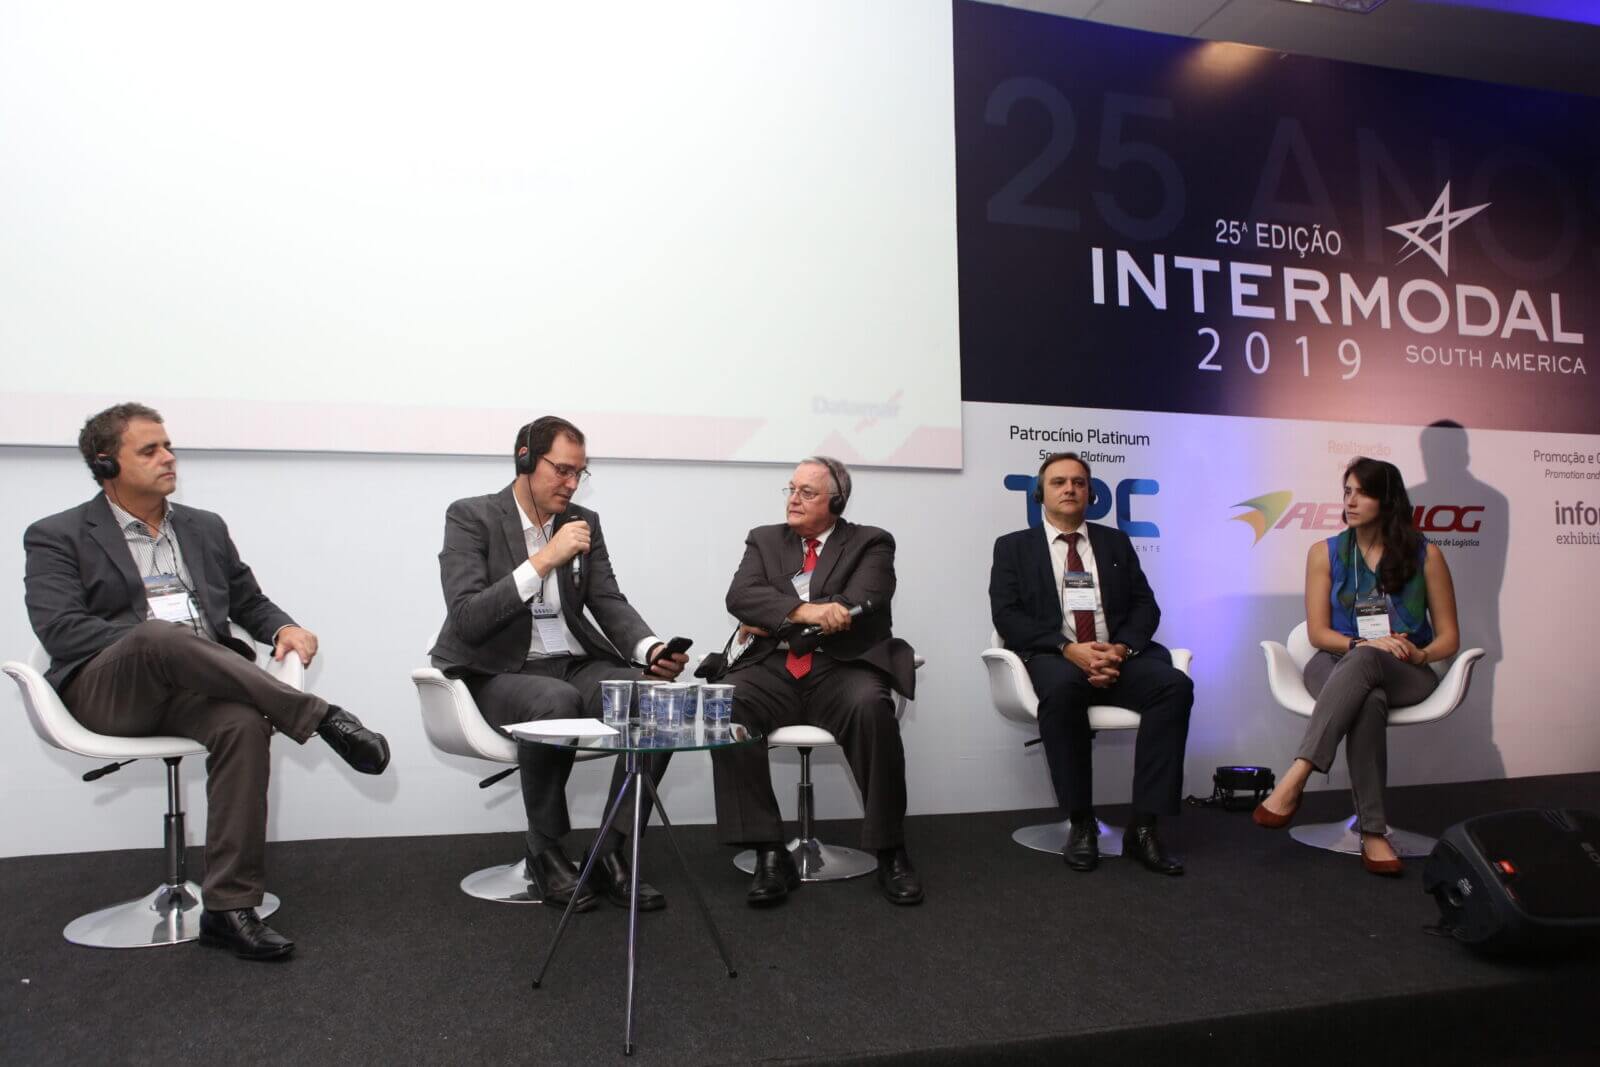 Datamar hosted conference panel at Intermodal 2019 discussing digital transformation in the port sector